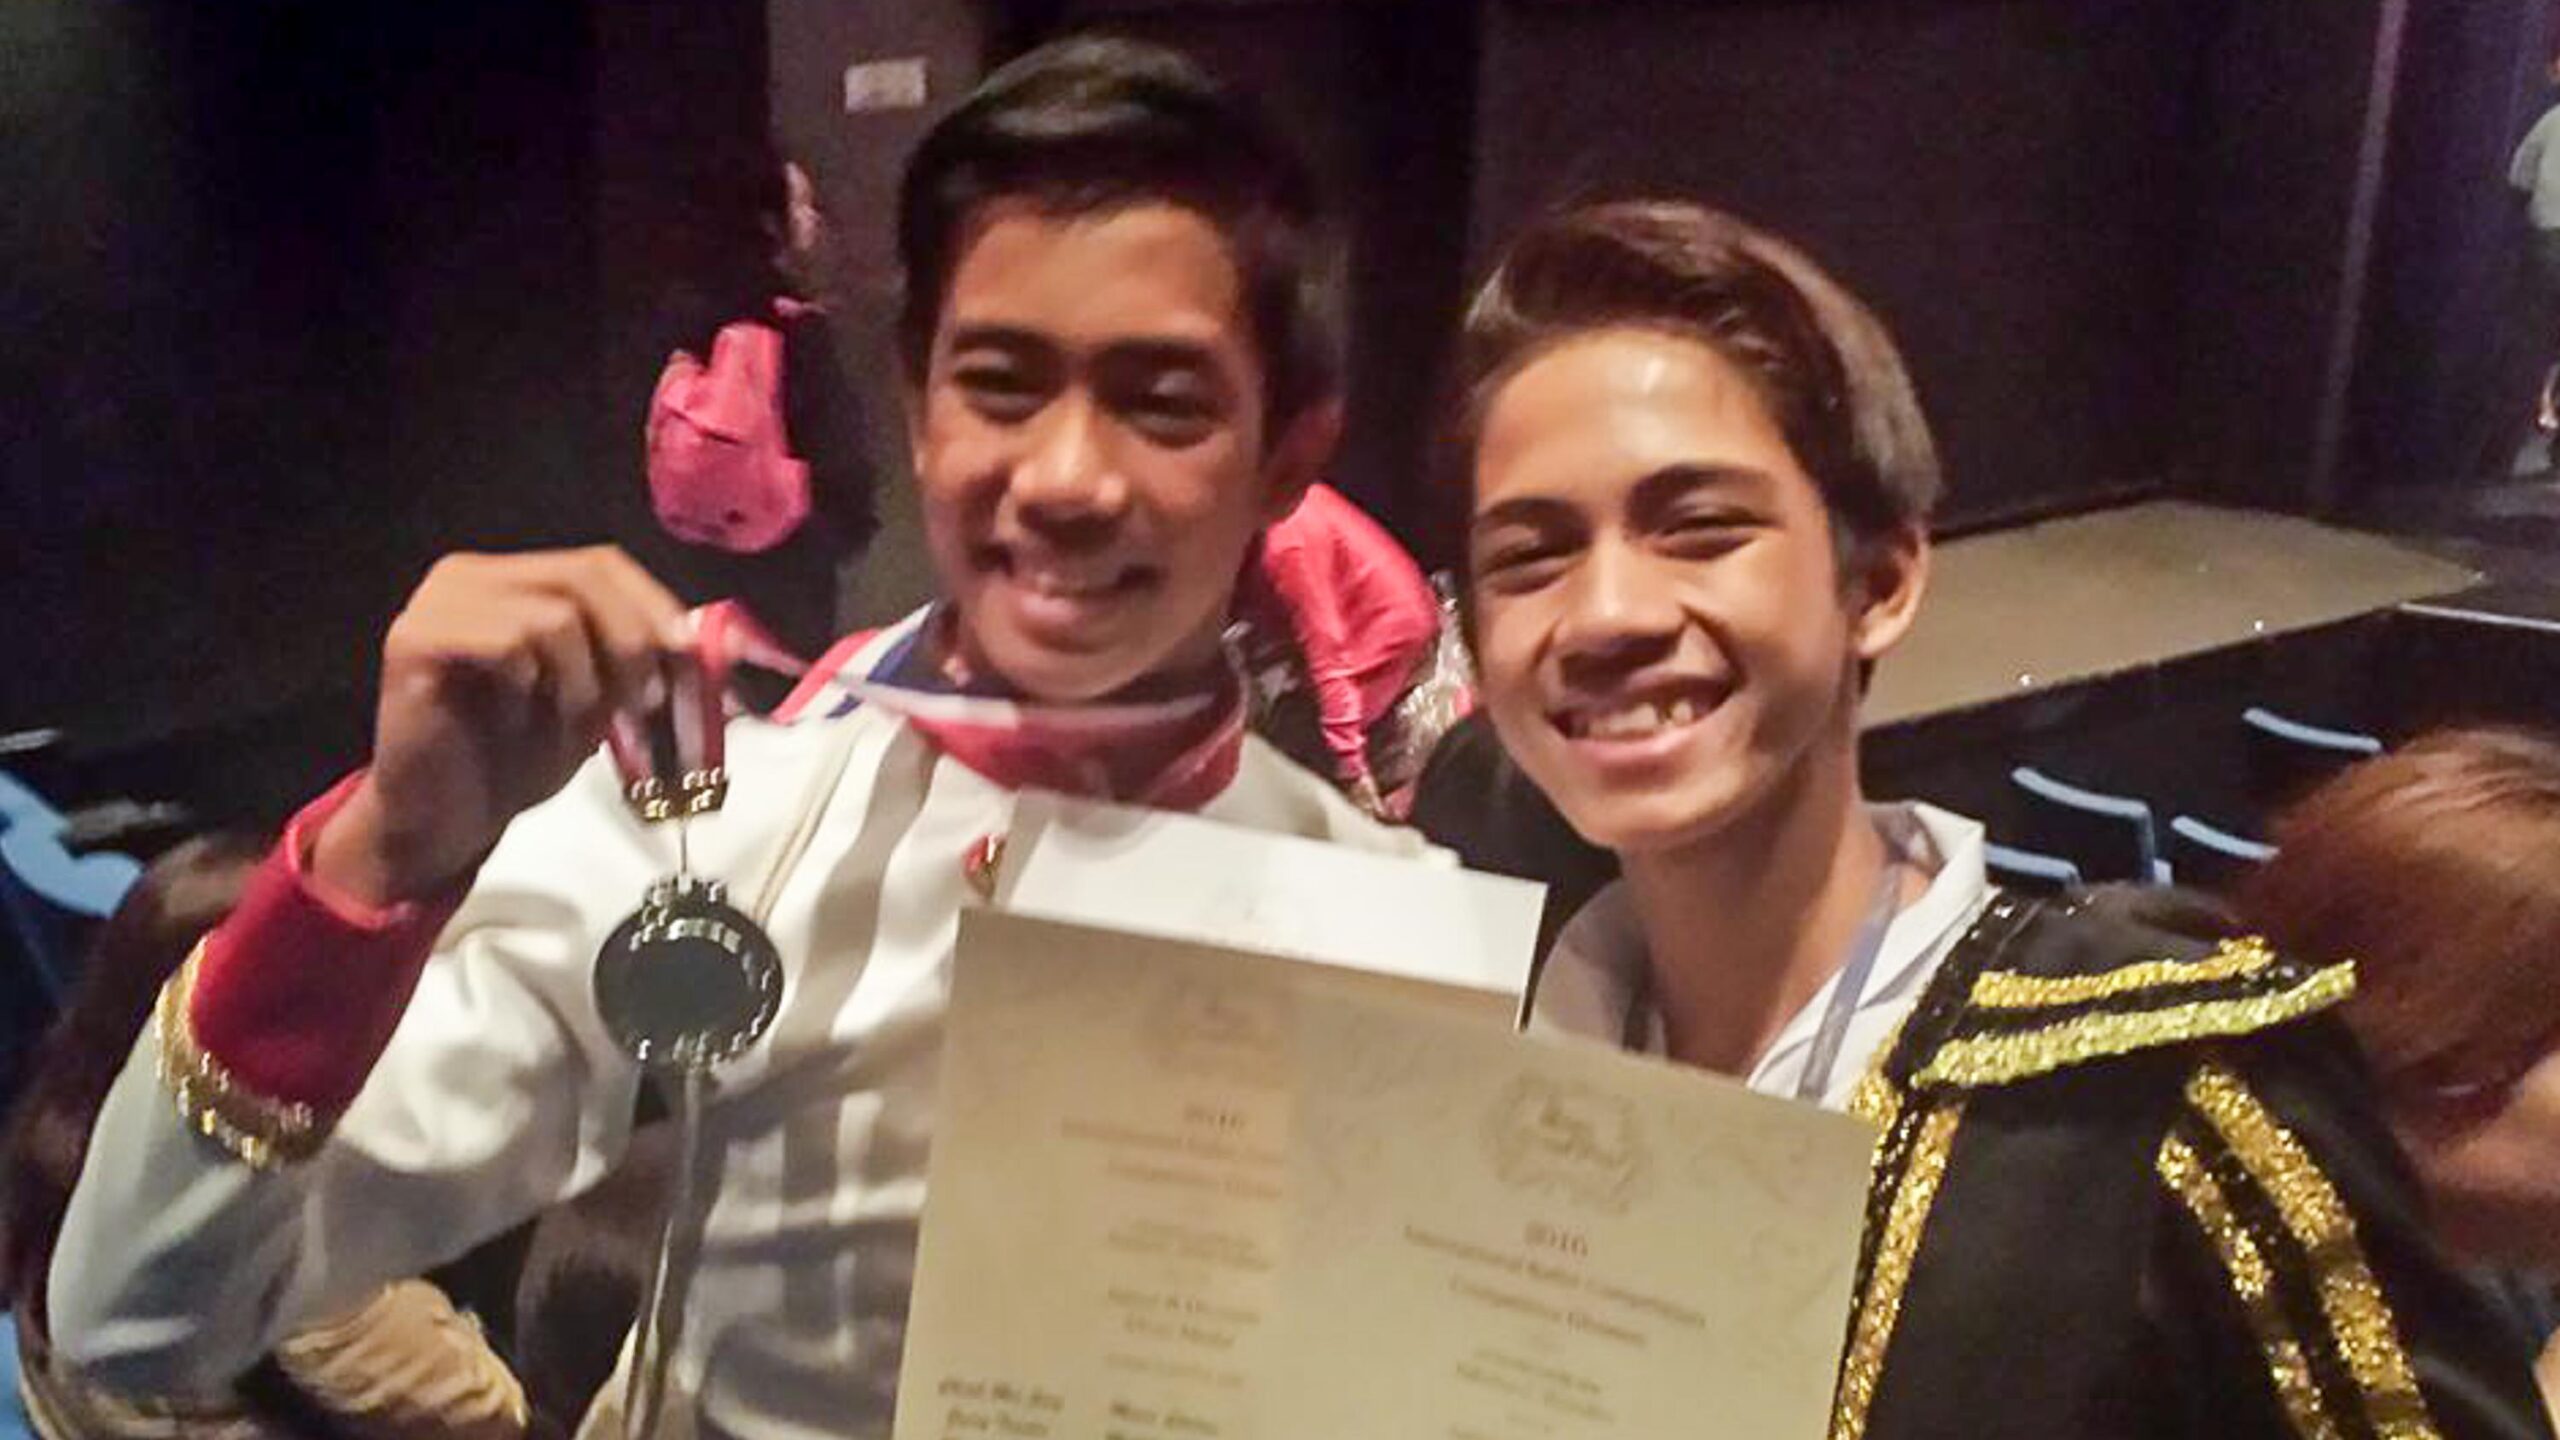 Former PH street kids win at Asian Grand Prix ballet competition